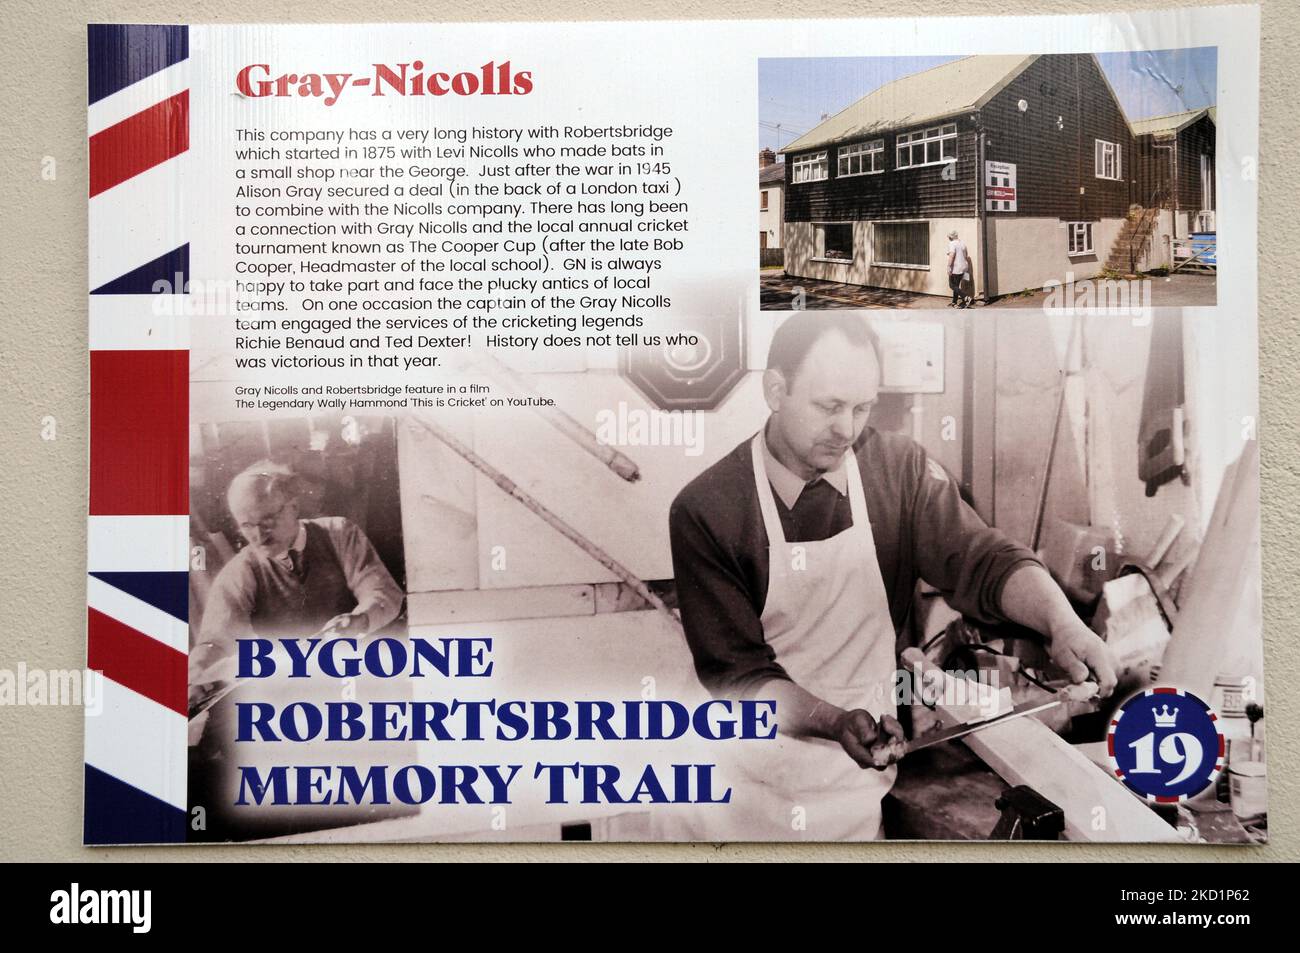 The Bygone Robertsbridge Memory Trail information panel outside the Grays-Nicholls factory. The company is world famous for making cricket bats. Stock Photo